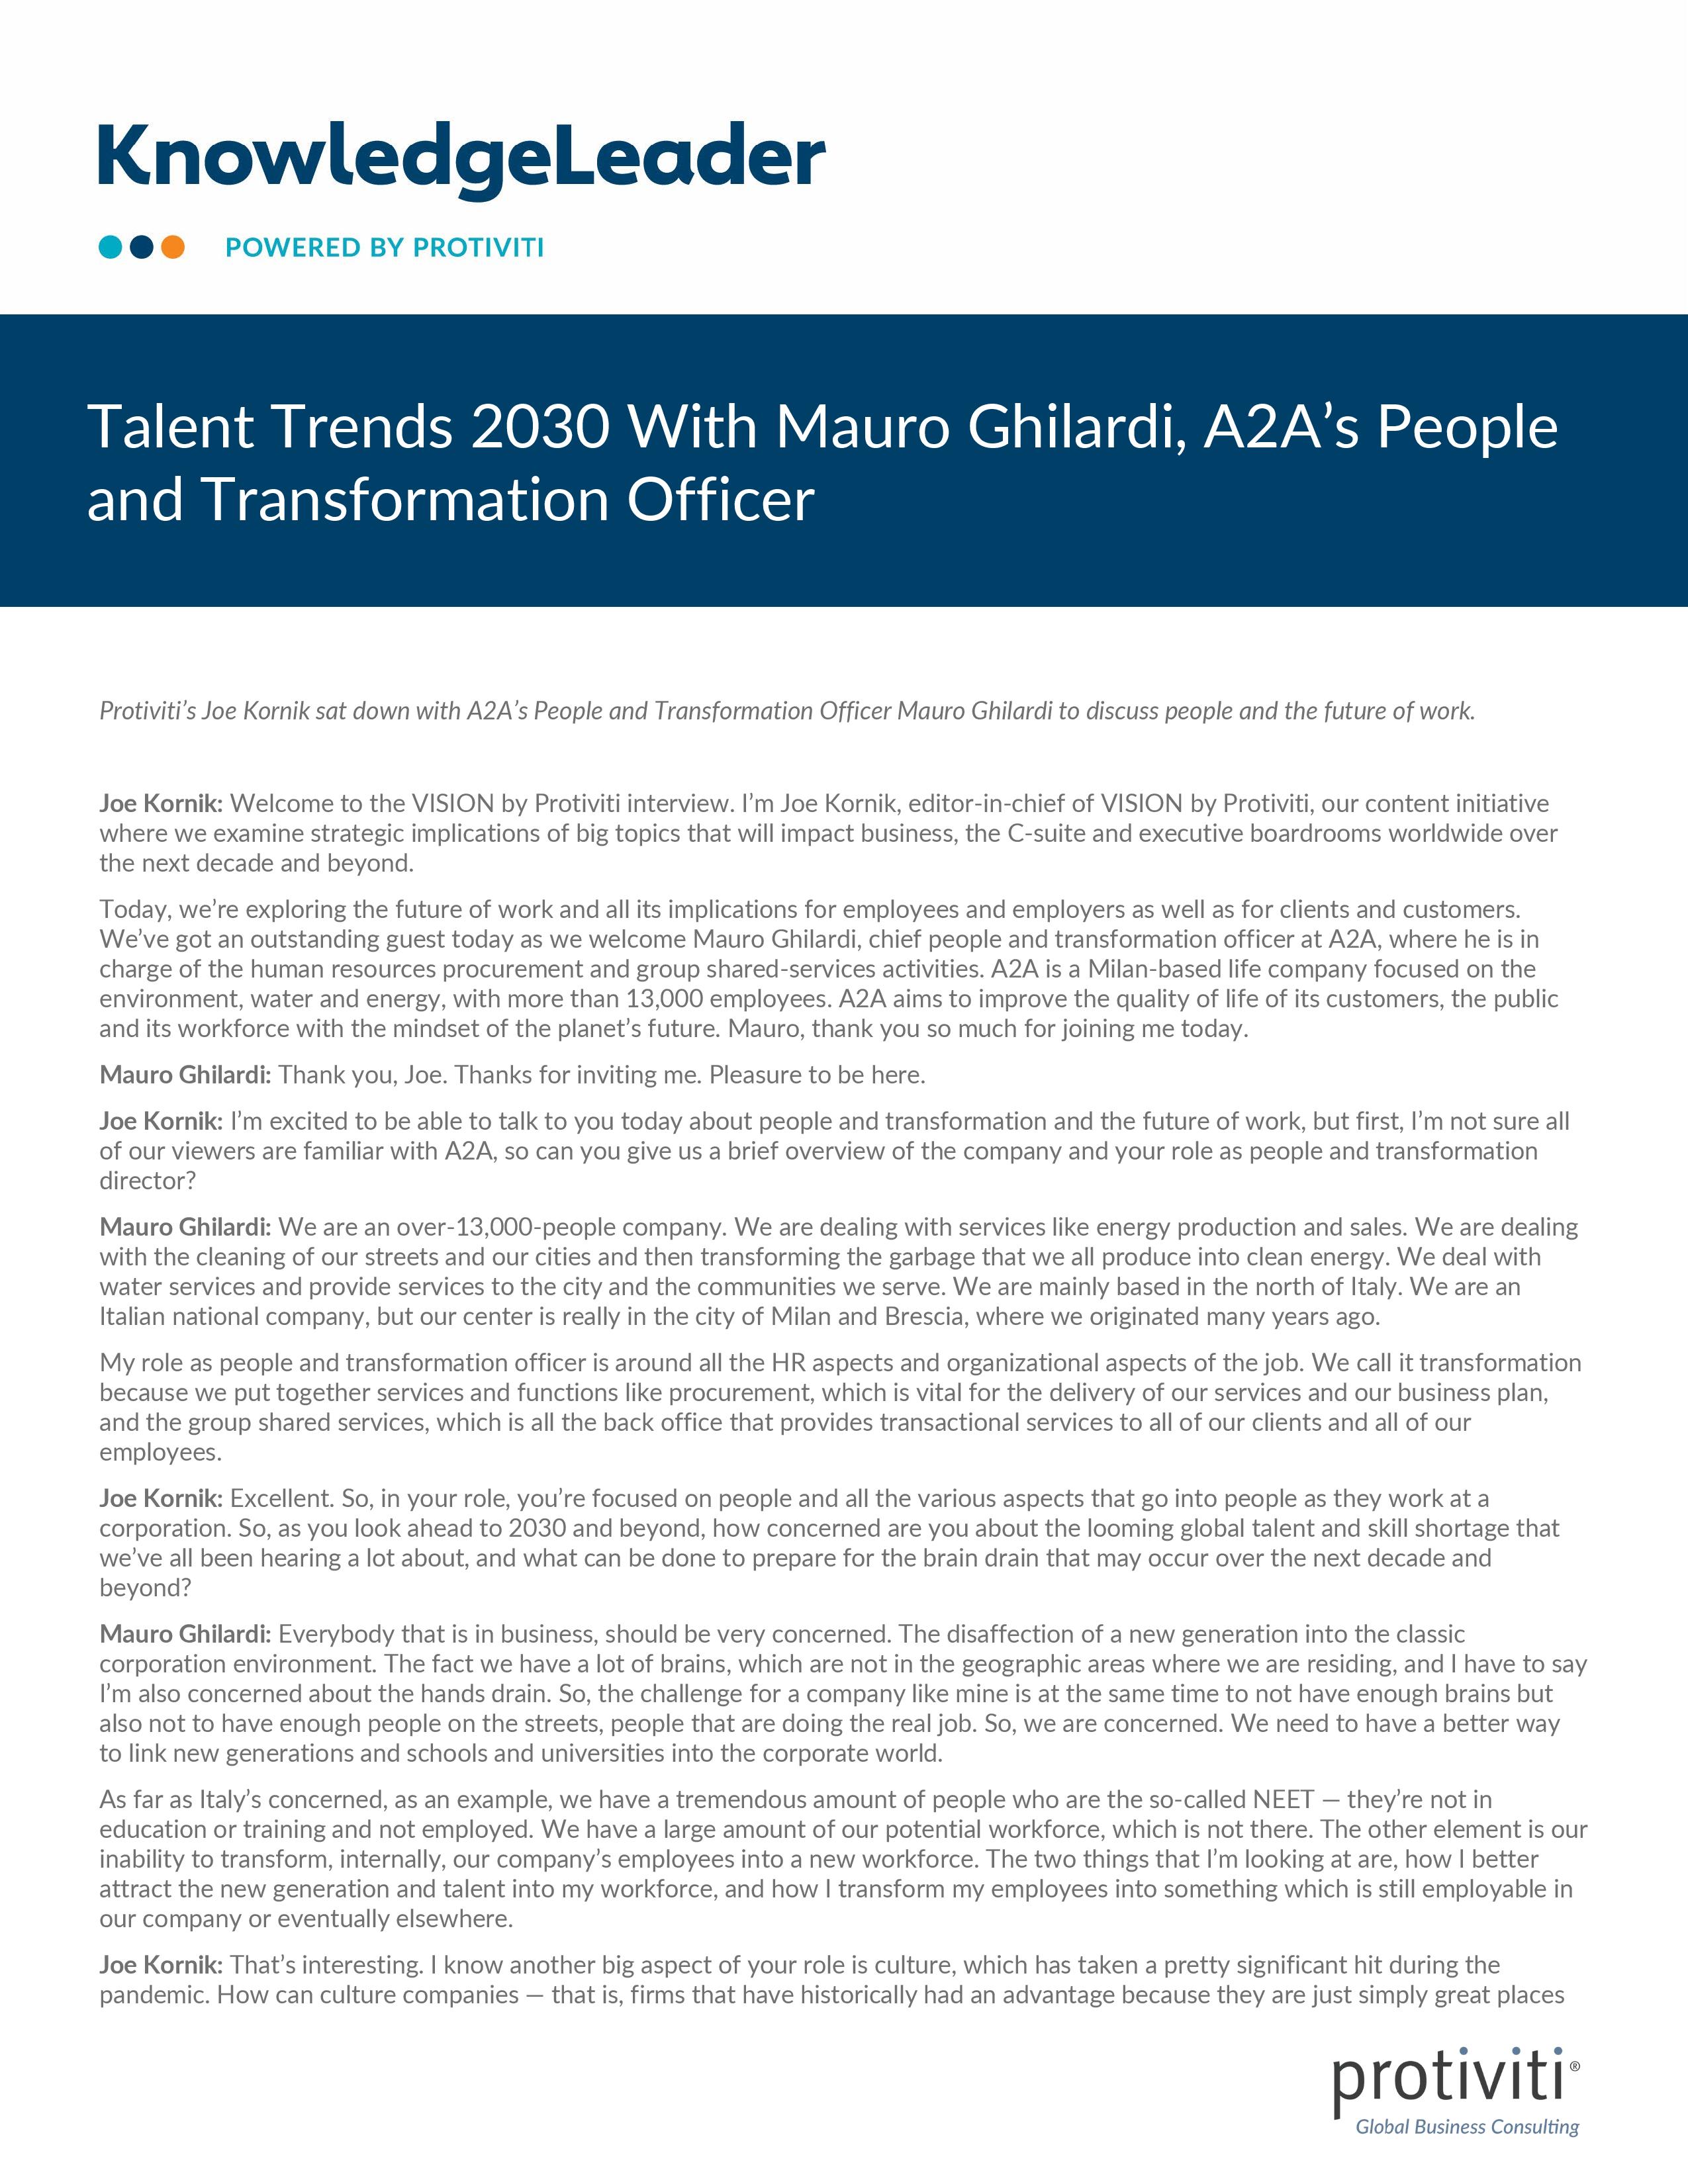 screenshot of the first page of Talent Trends 2030 With Mauro Ghilardi, A2A’s People and Transformation Officer